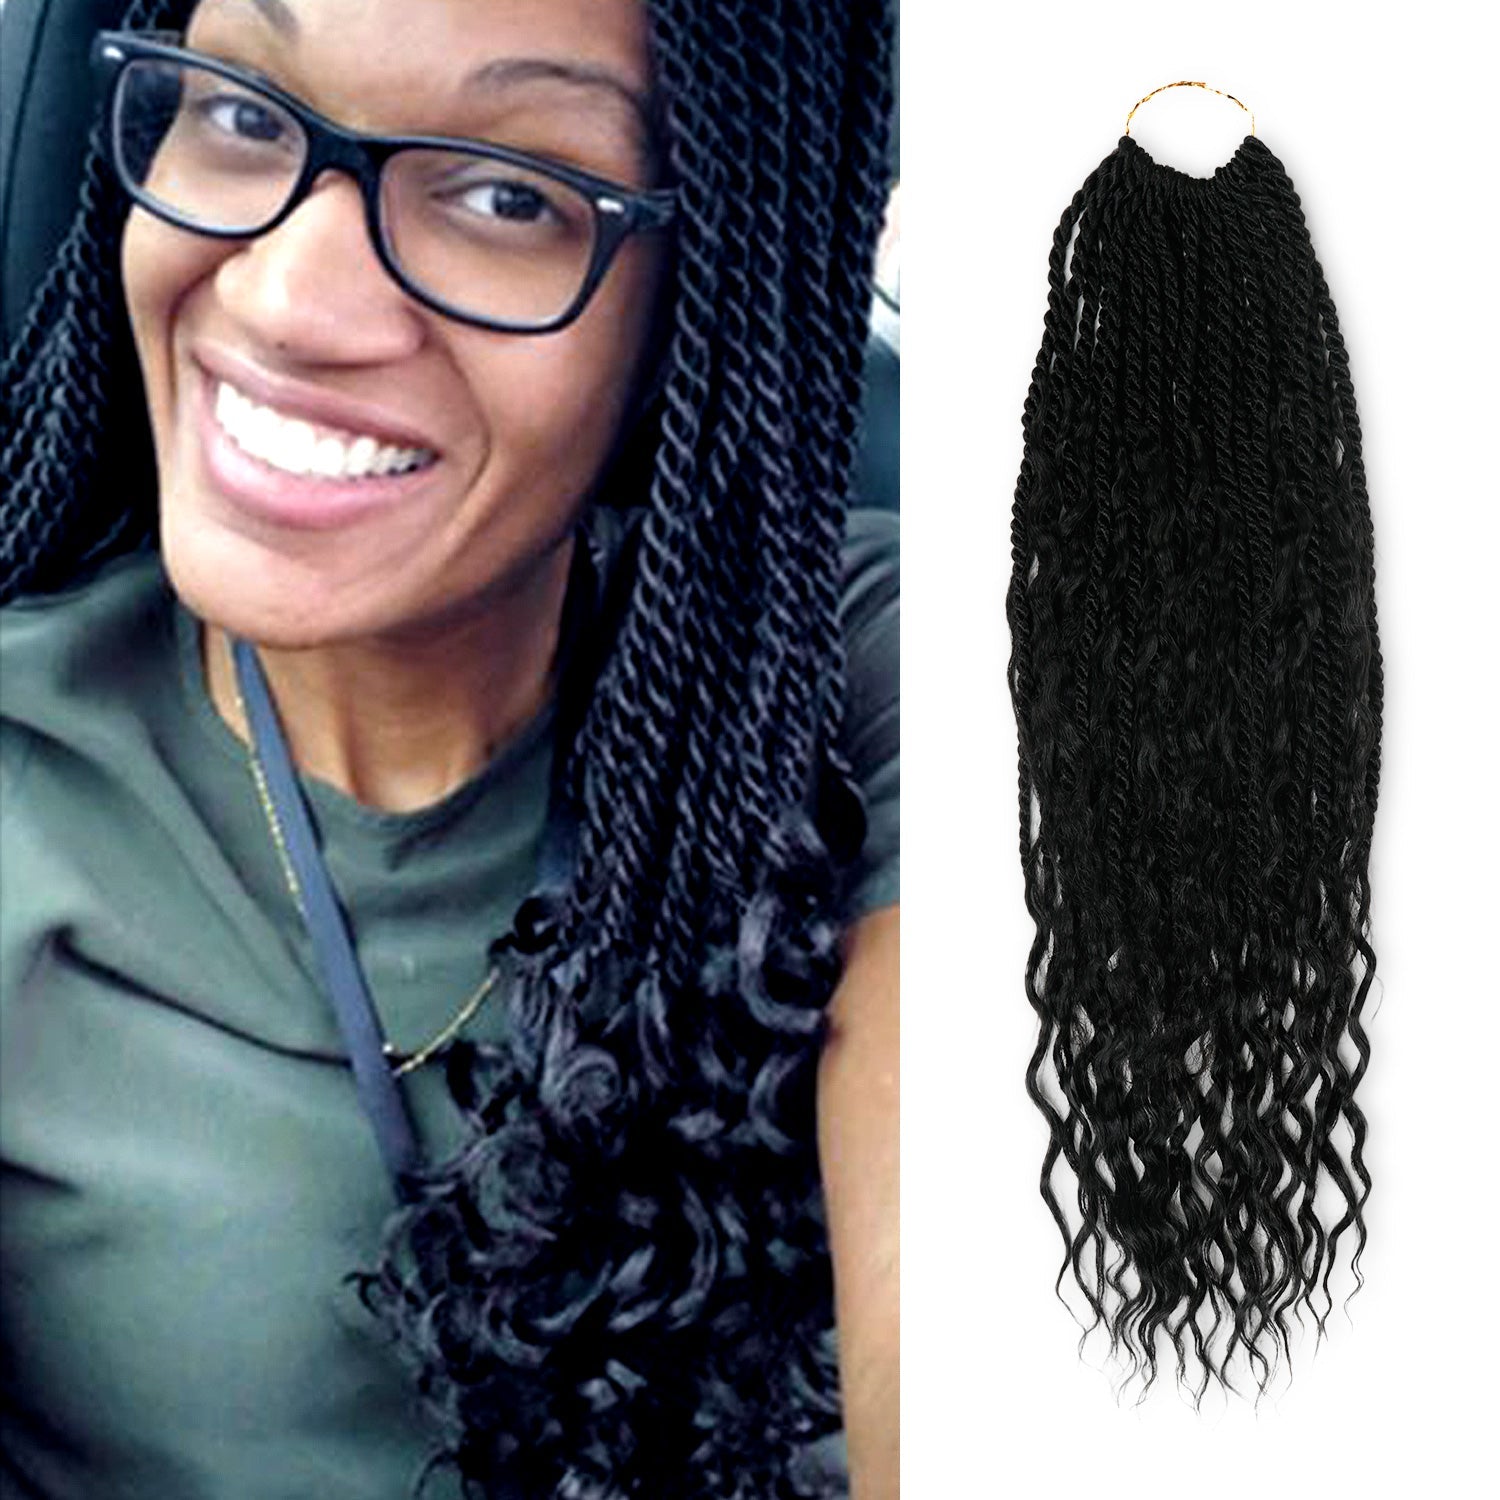 Authentic Synthetic Hair Pre-Looped Boho Goddess Senegalese Twist 24"